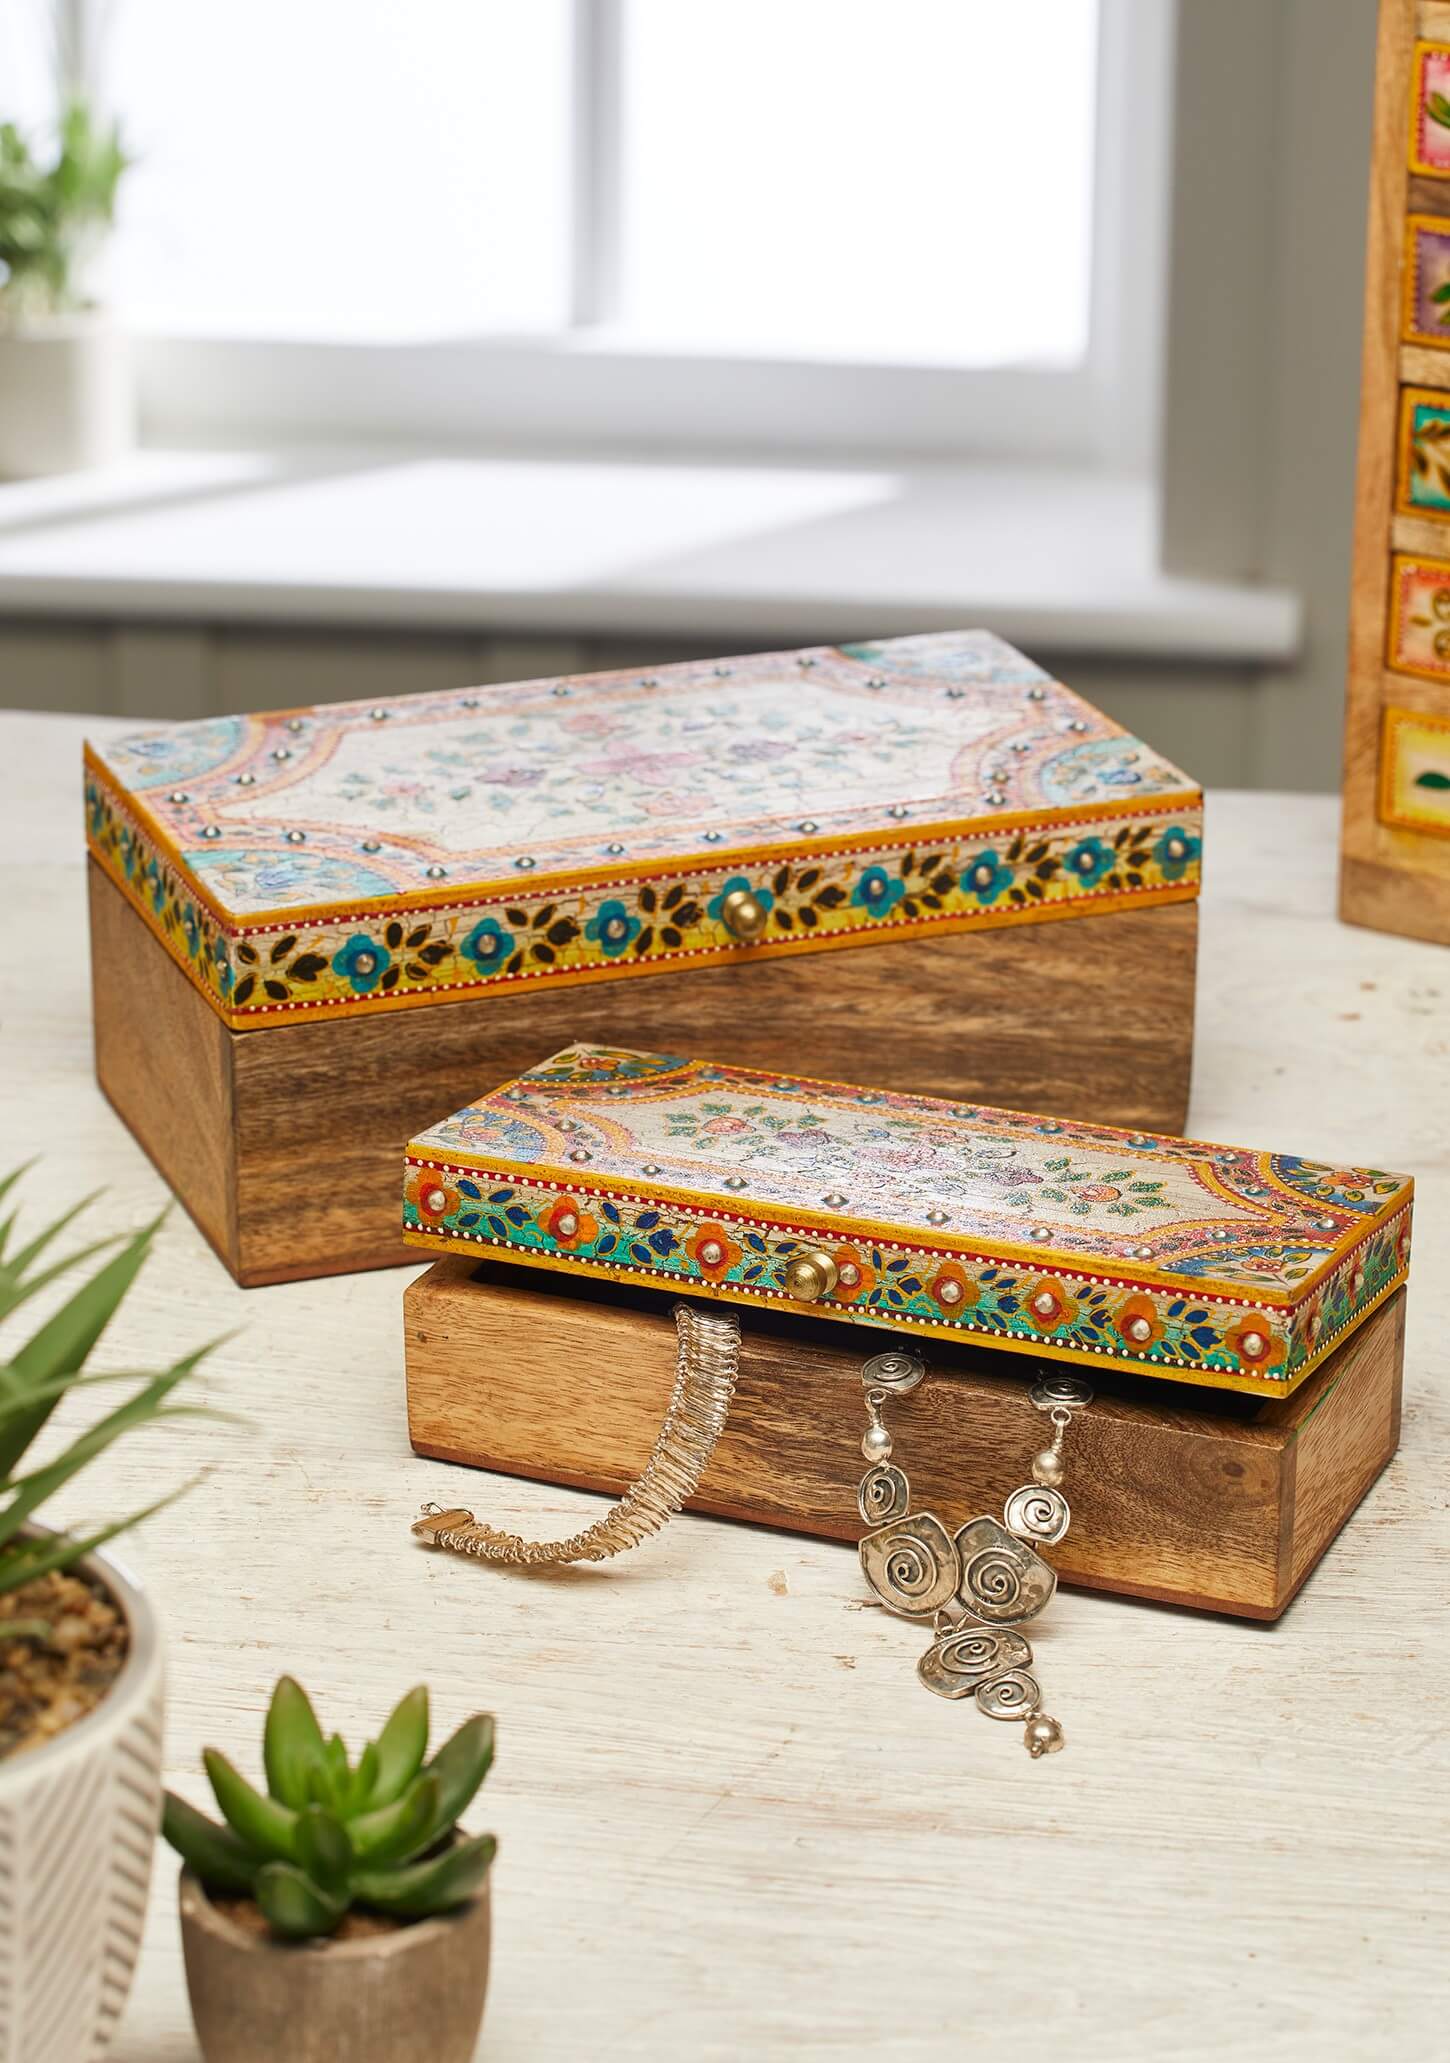 Handmade Wooden Floral Jewellery Box - Set Of Large & Small